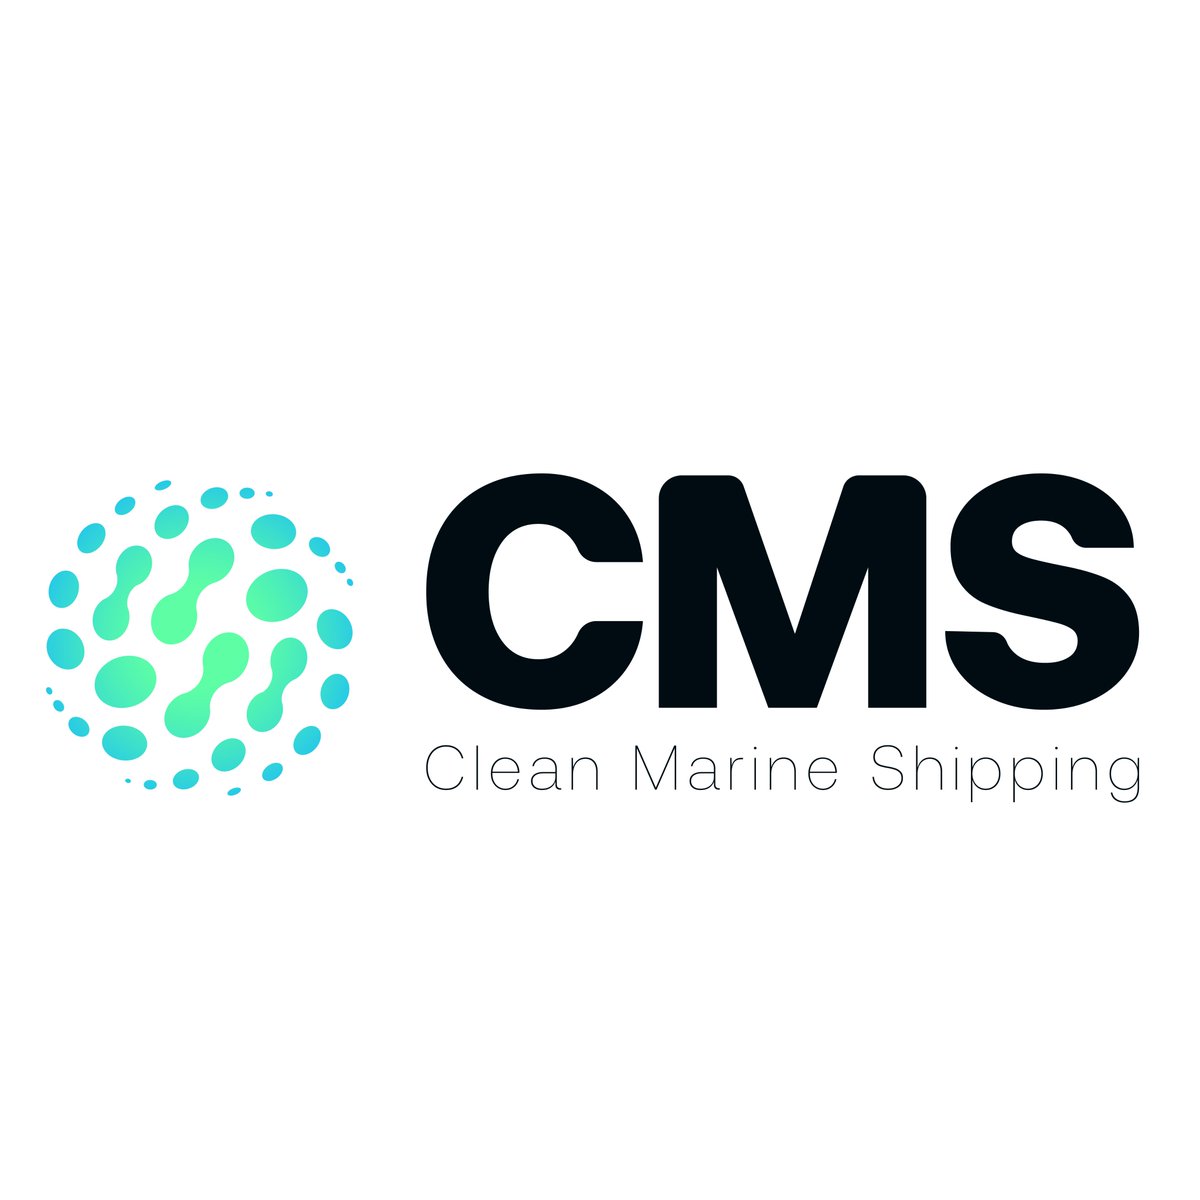 MarRI-UK is excited to annouce that Clean Marine Shipping has become our newest Tier 3 Industrial Member! marri-uk.org/index.php/2024…